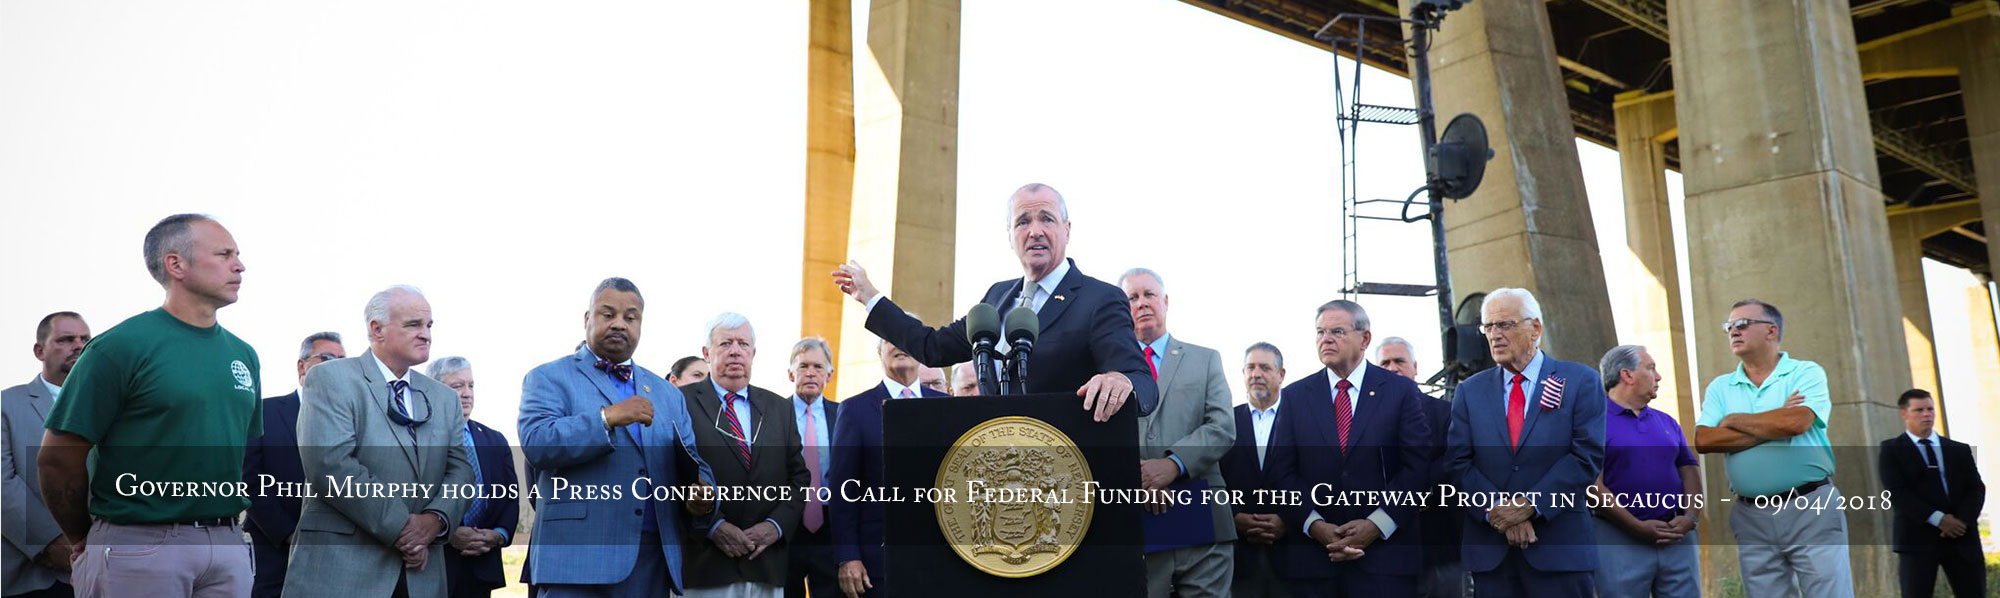 Governor Phil Murphy holds a press conference to call for federal funding for the Gateway Project in Secaucus on September 4, 2018